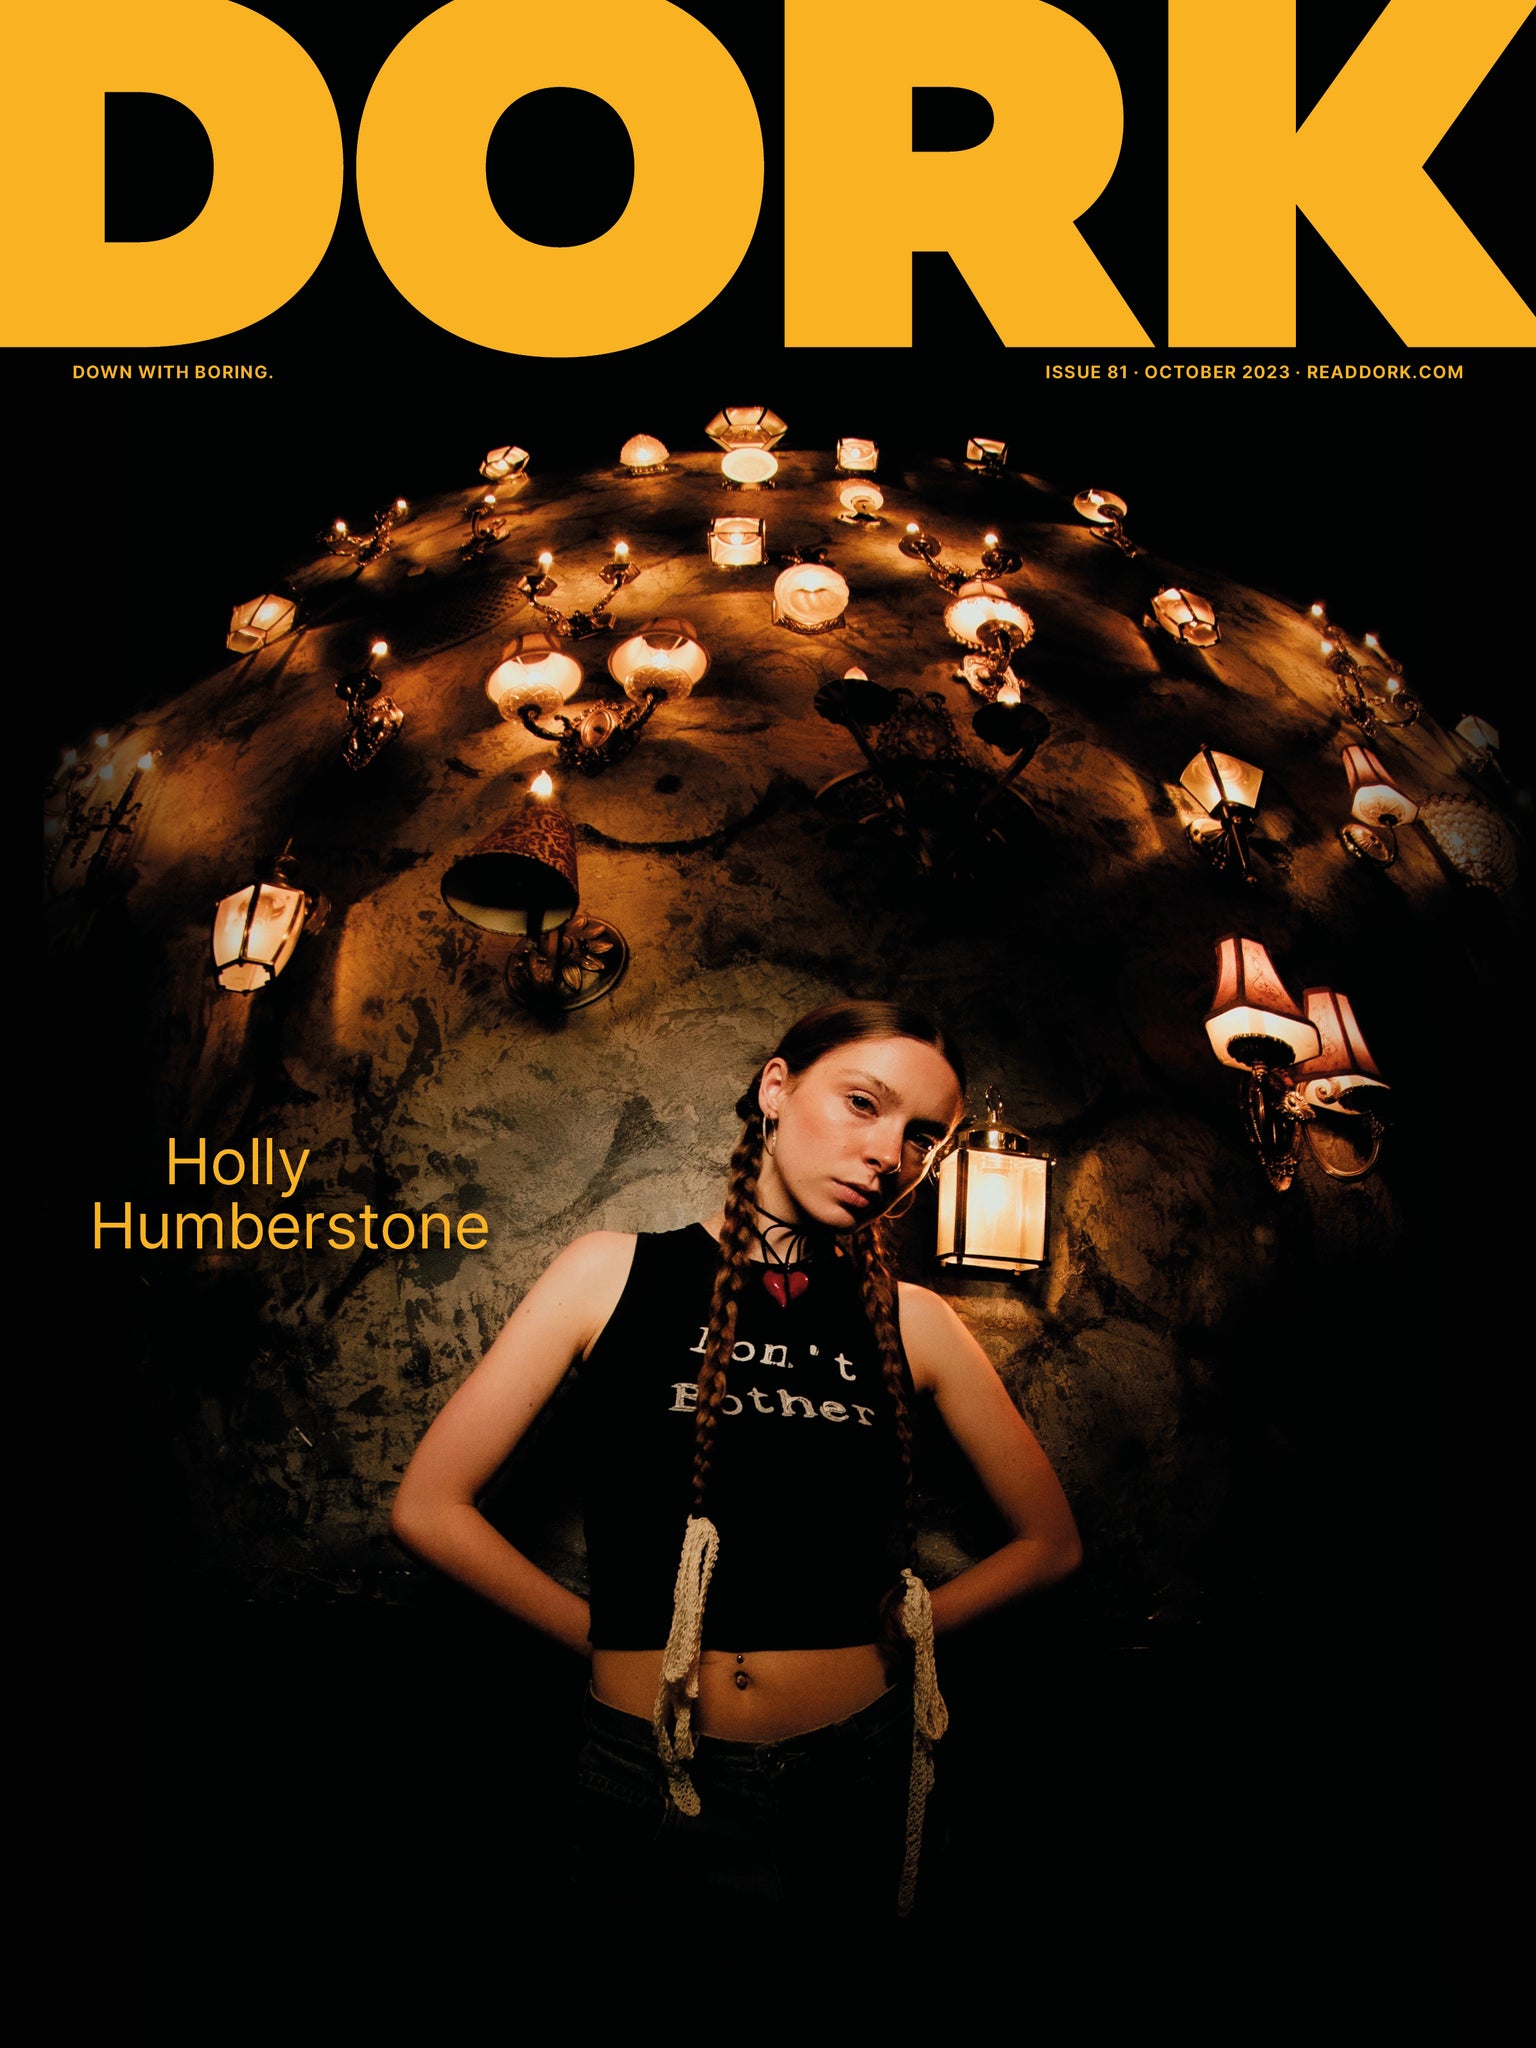 Dork, October 2023 (Holly Humberstone cover)